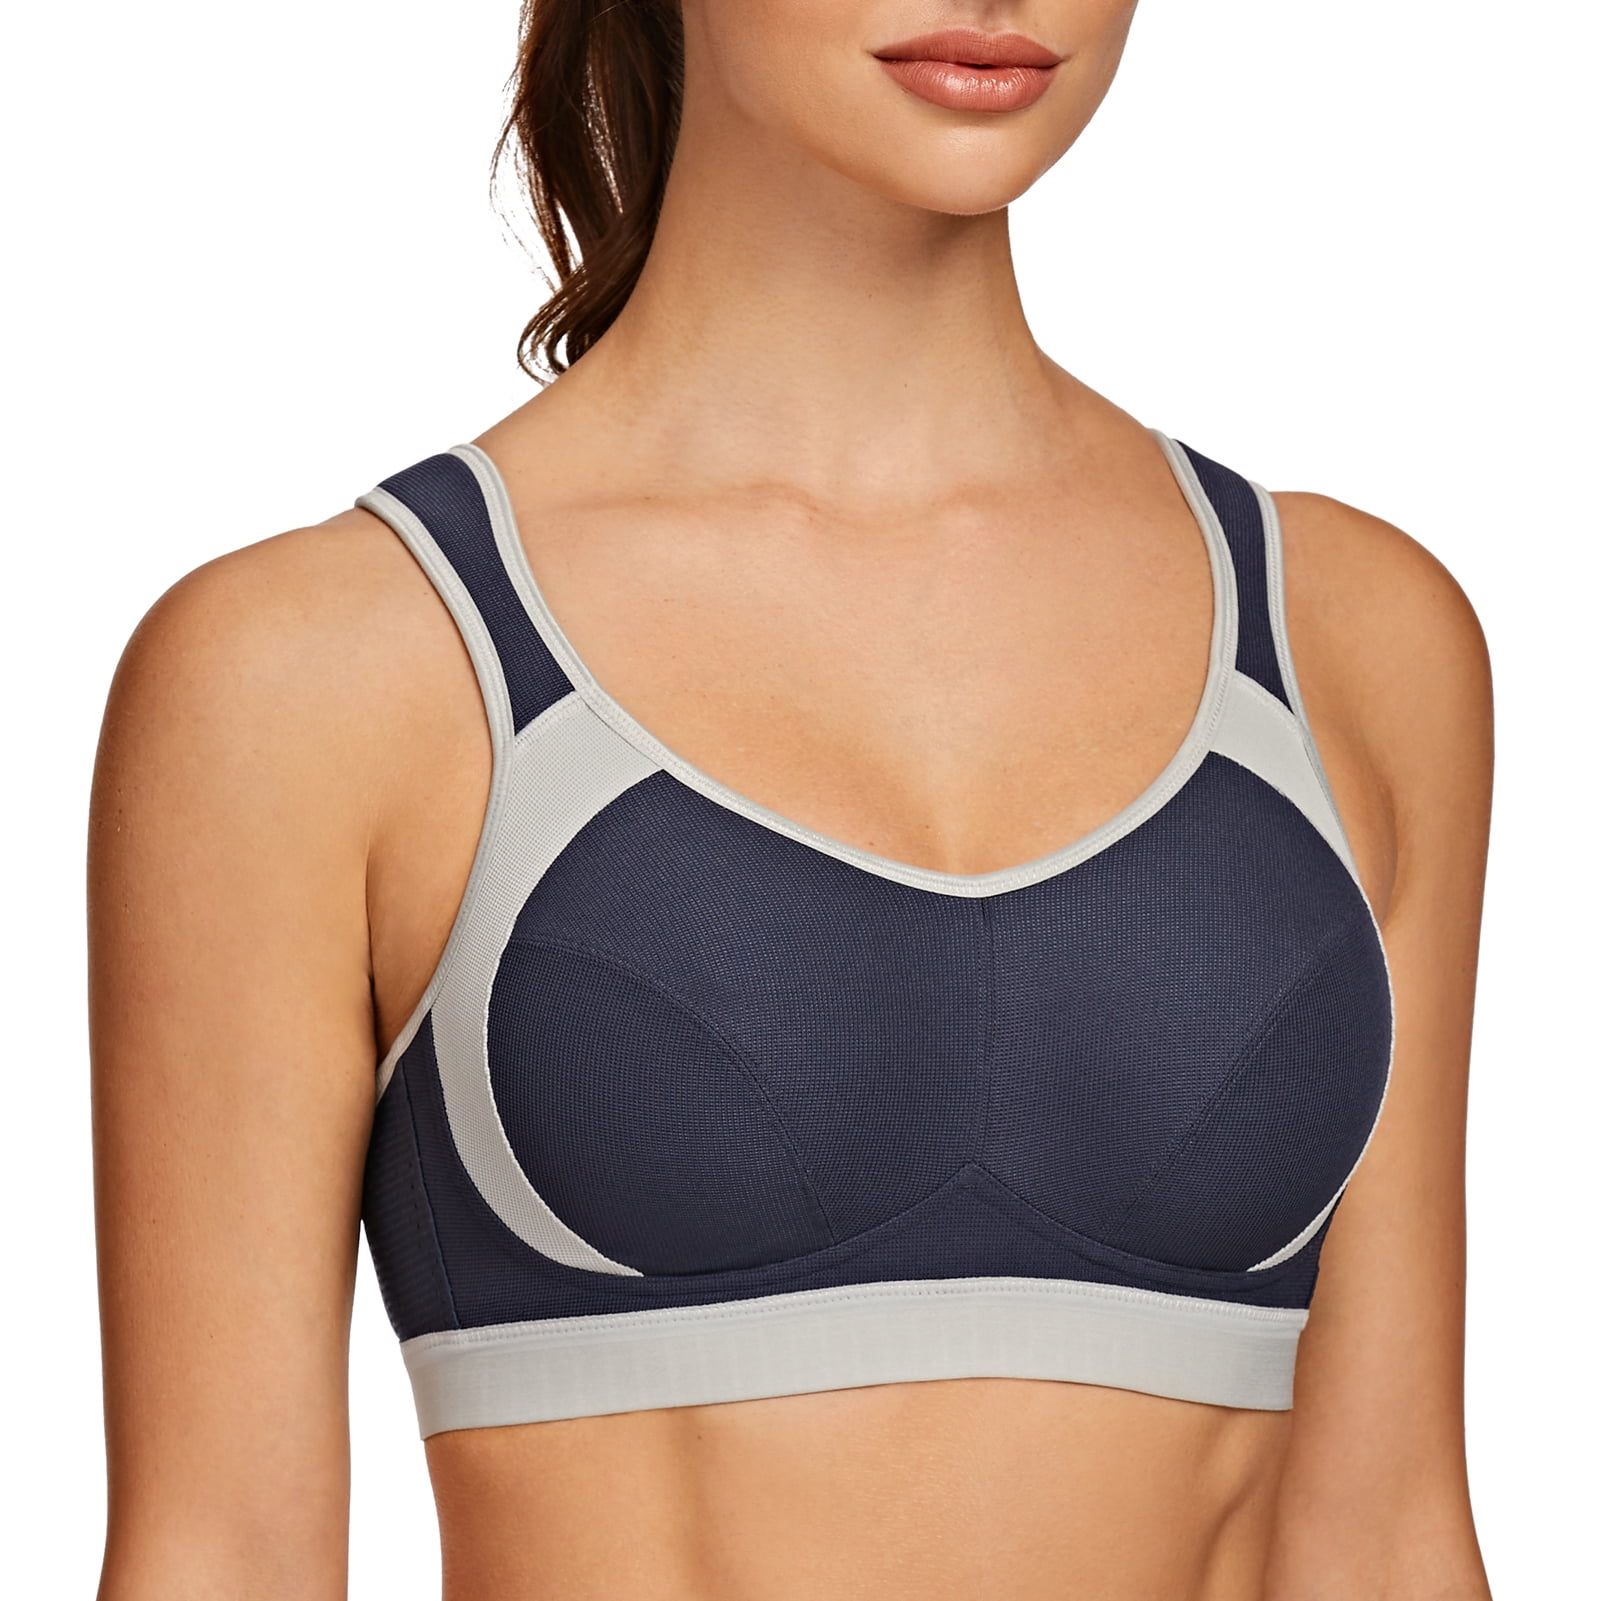 AGONVIN Women's High Impact Support Wirefree Bounce Control Plus Size  Workout Sports Bra Navy Blue 40G 